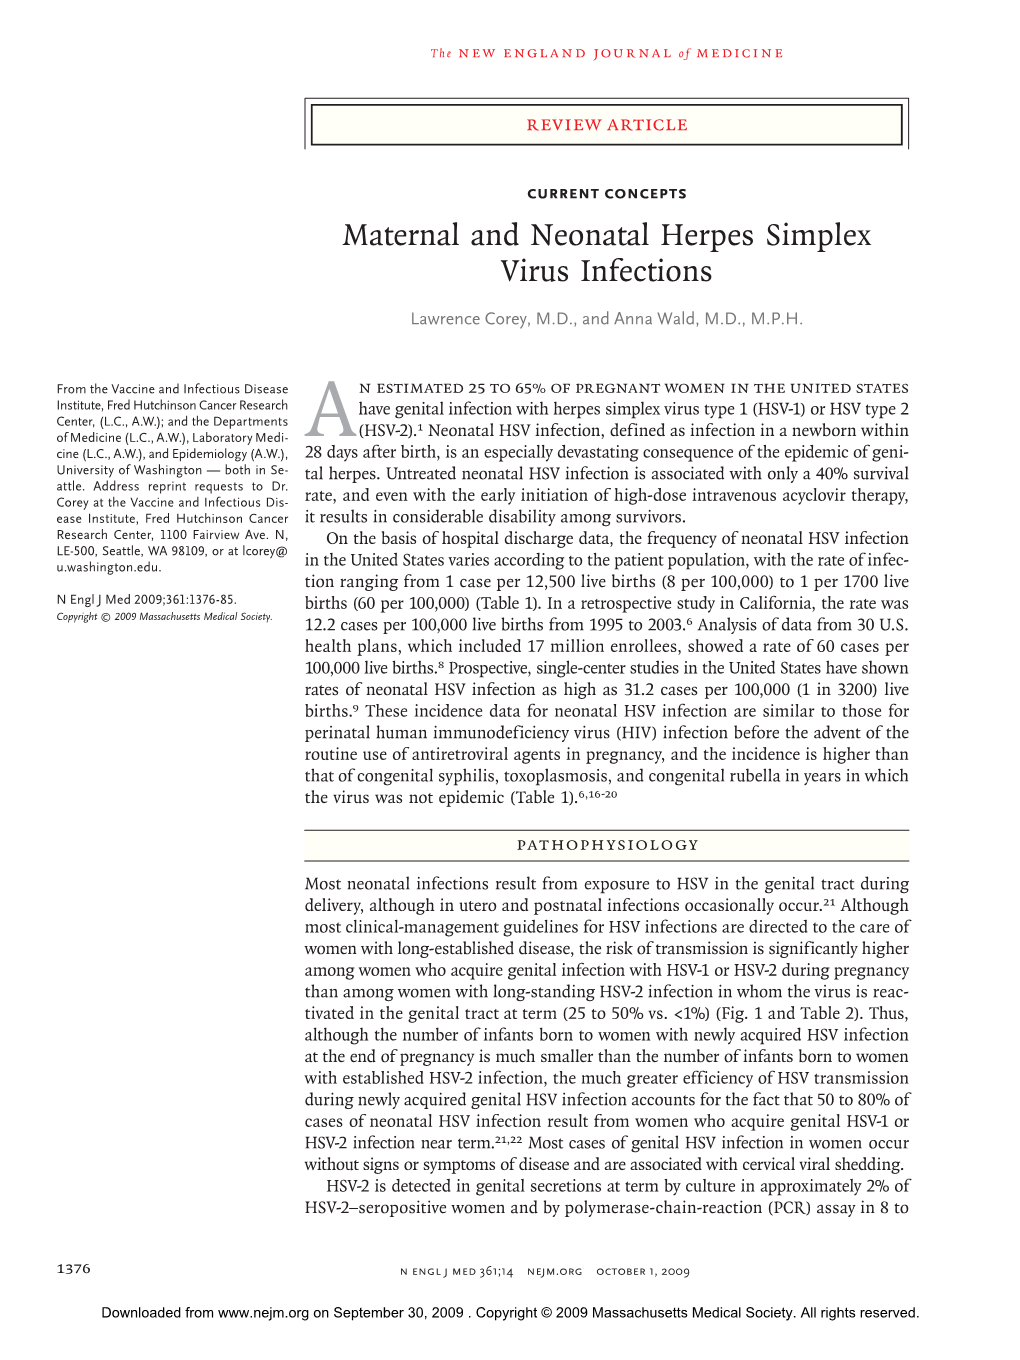 Maternal and Neonatal Herpes Simplex Virus Infections